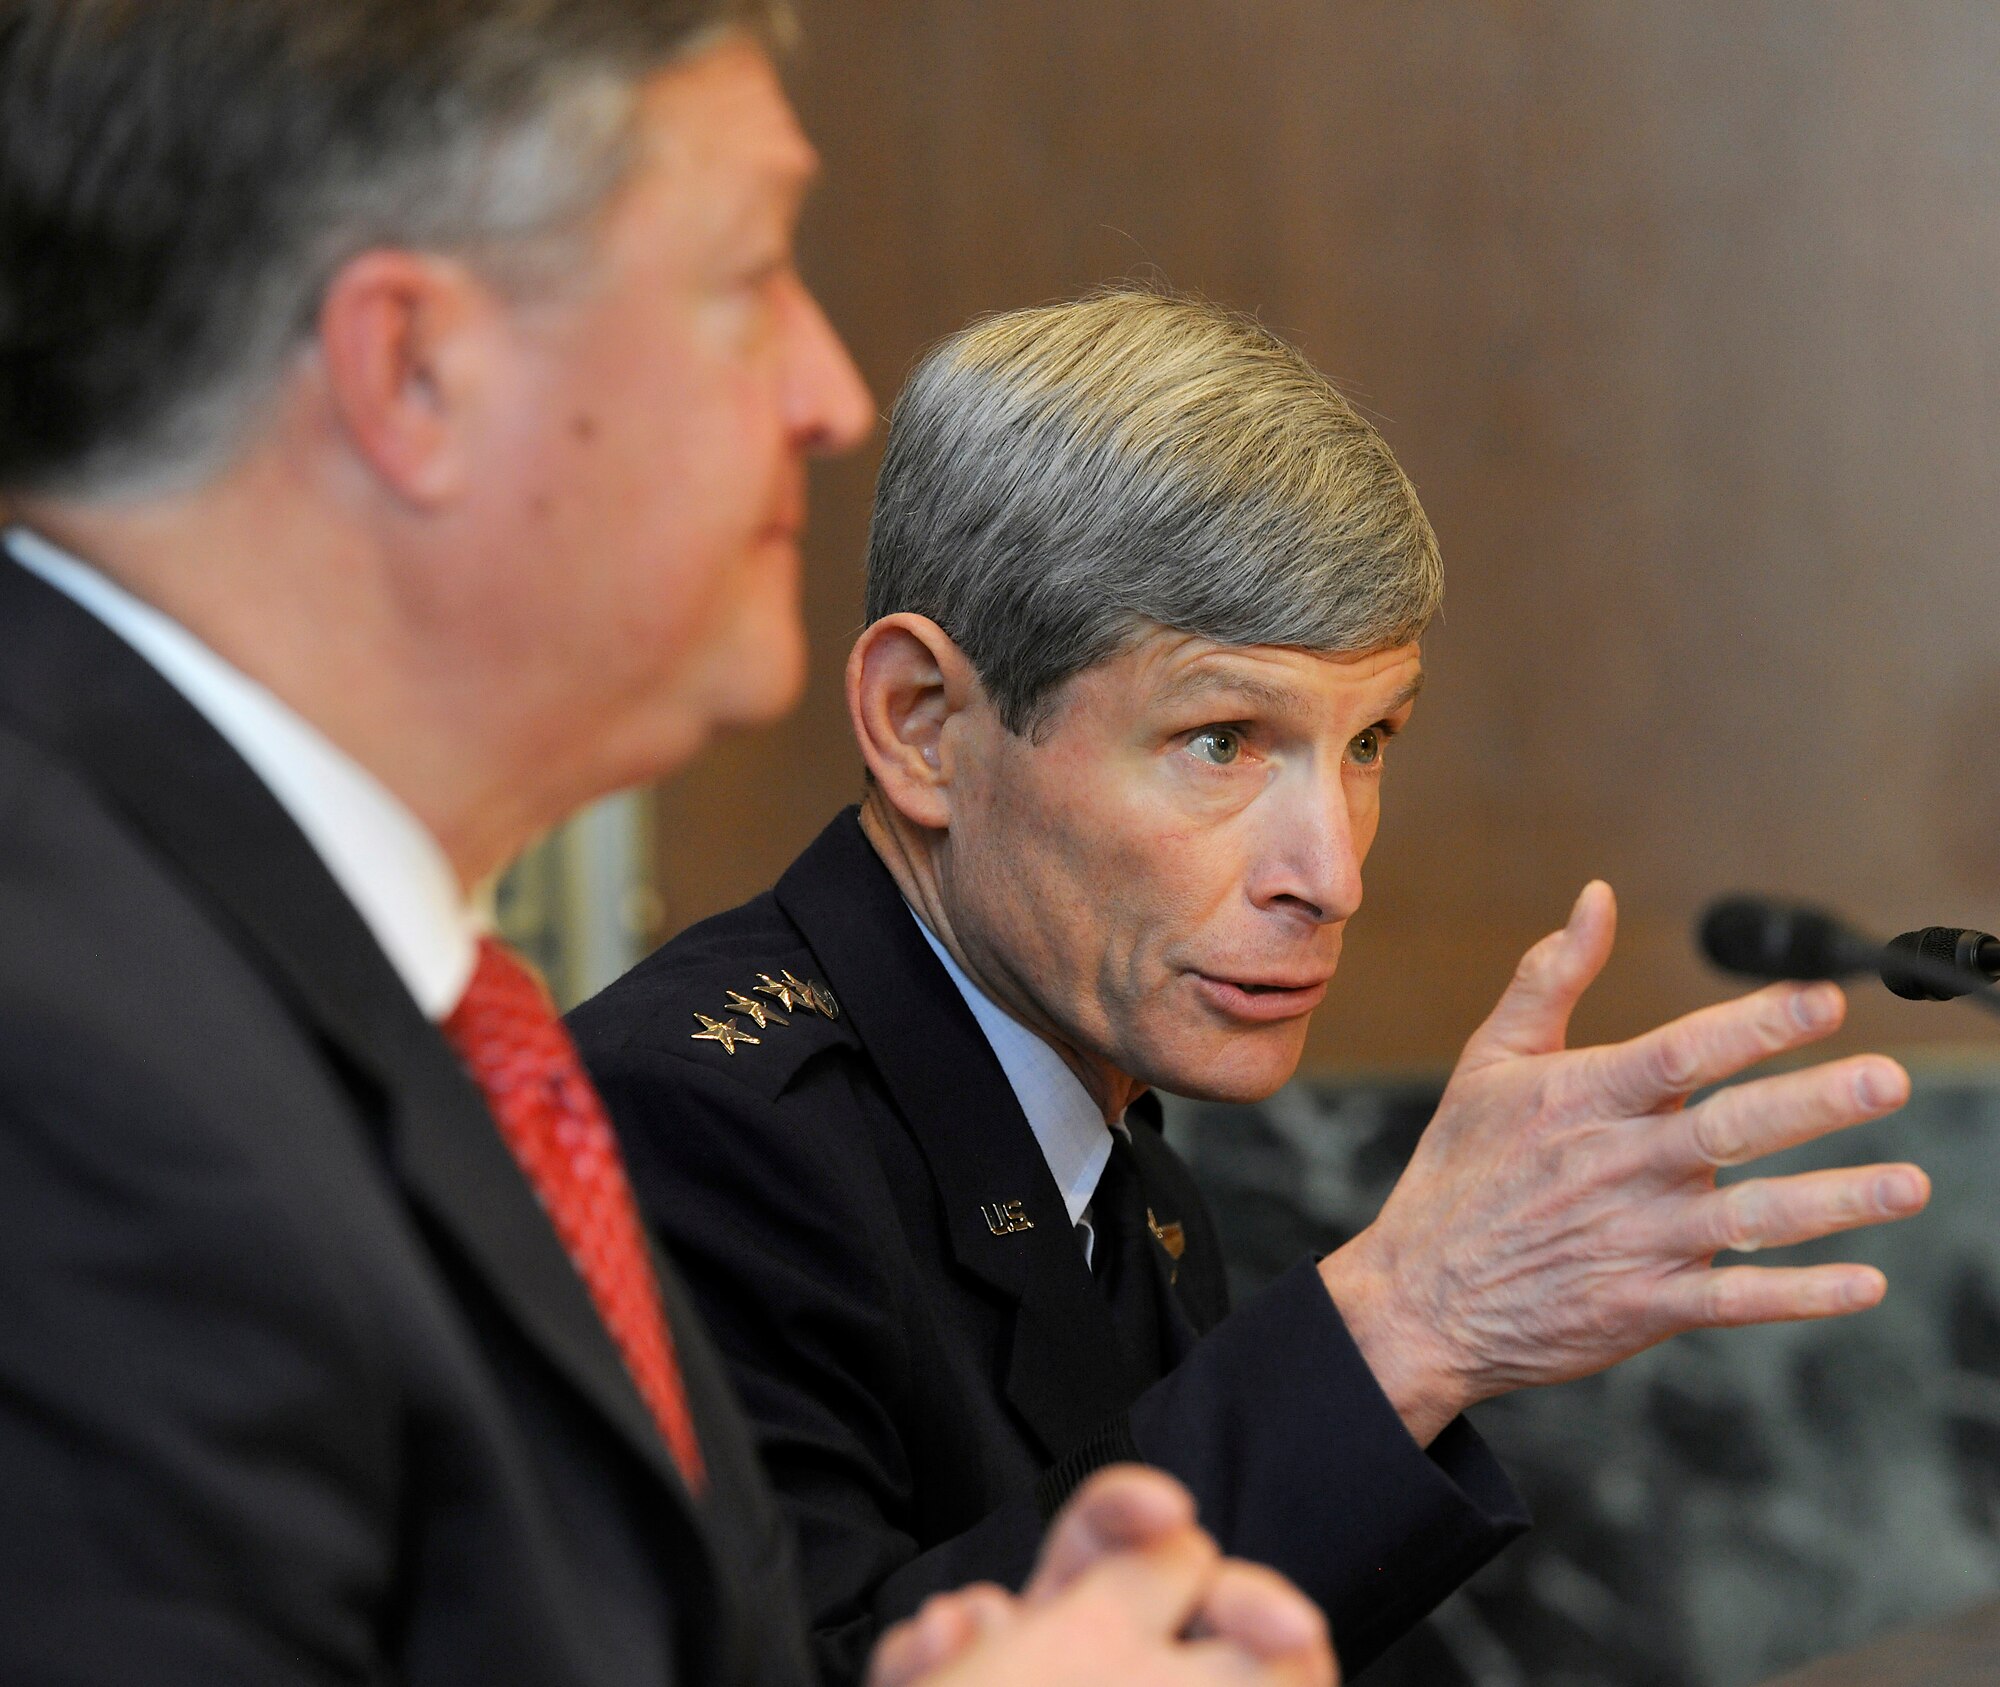 Air Force Chief of Staff Gen. Norton Schwartz and Secretary of the Air Force Michael Donley provide testimony about the Air Force’s FY13 budget request before the U.S. Senate Appropriations Subcommittee on Defense on March 14, 2012, in Washington, D.C.  (U.S. Air Force photo/Scott M. Ash)